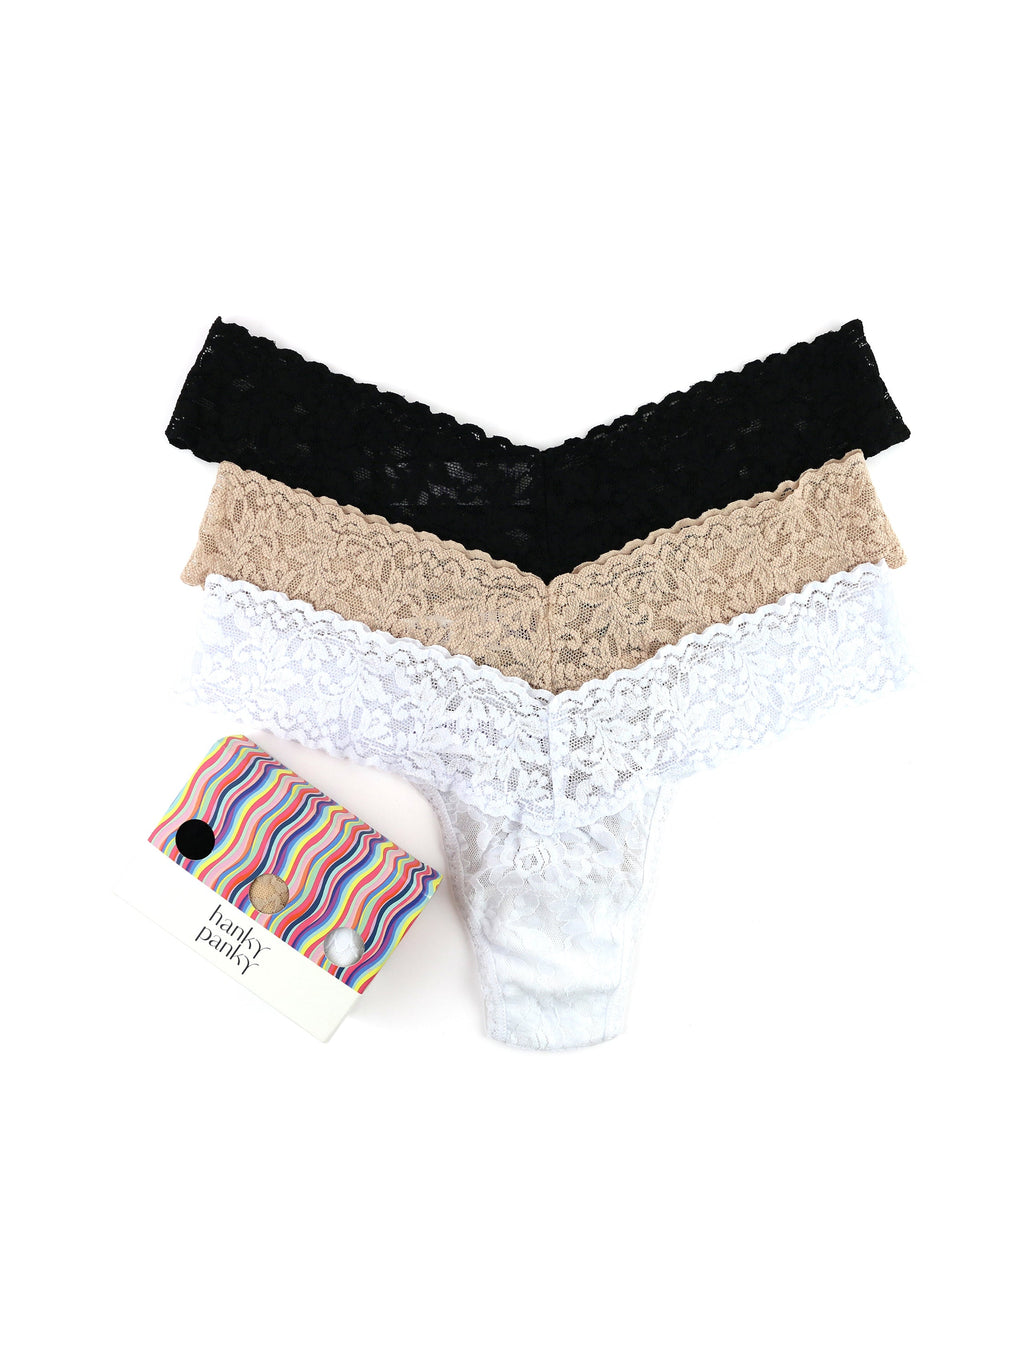 Low Rise Signature Lace Thongs - 5 Pack Black/Chai/Bliss O/S by Hanky Panky